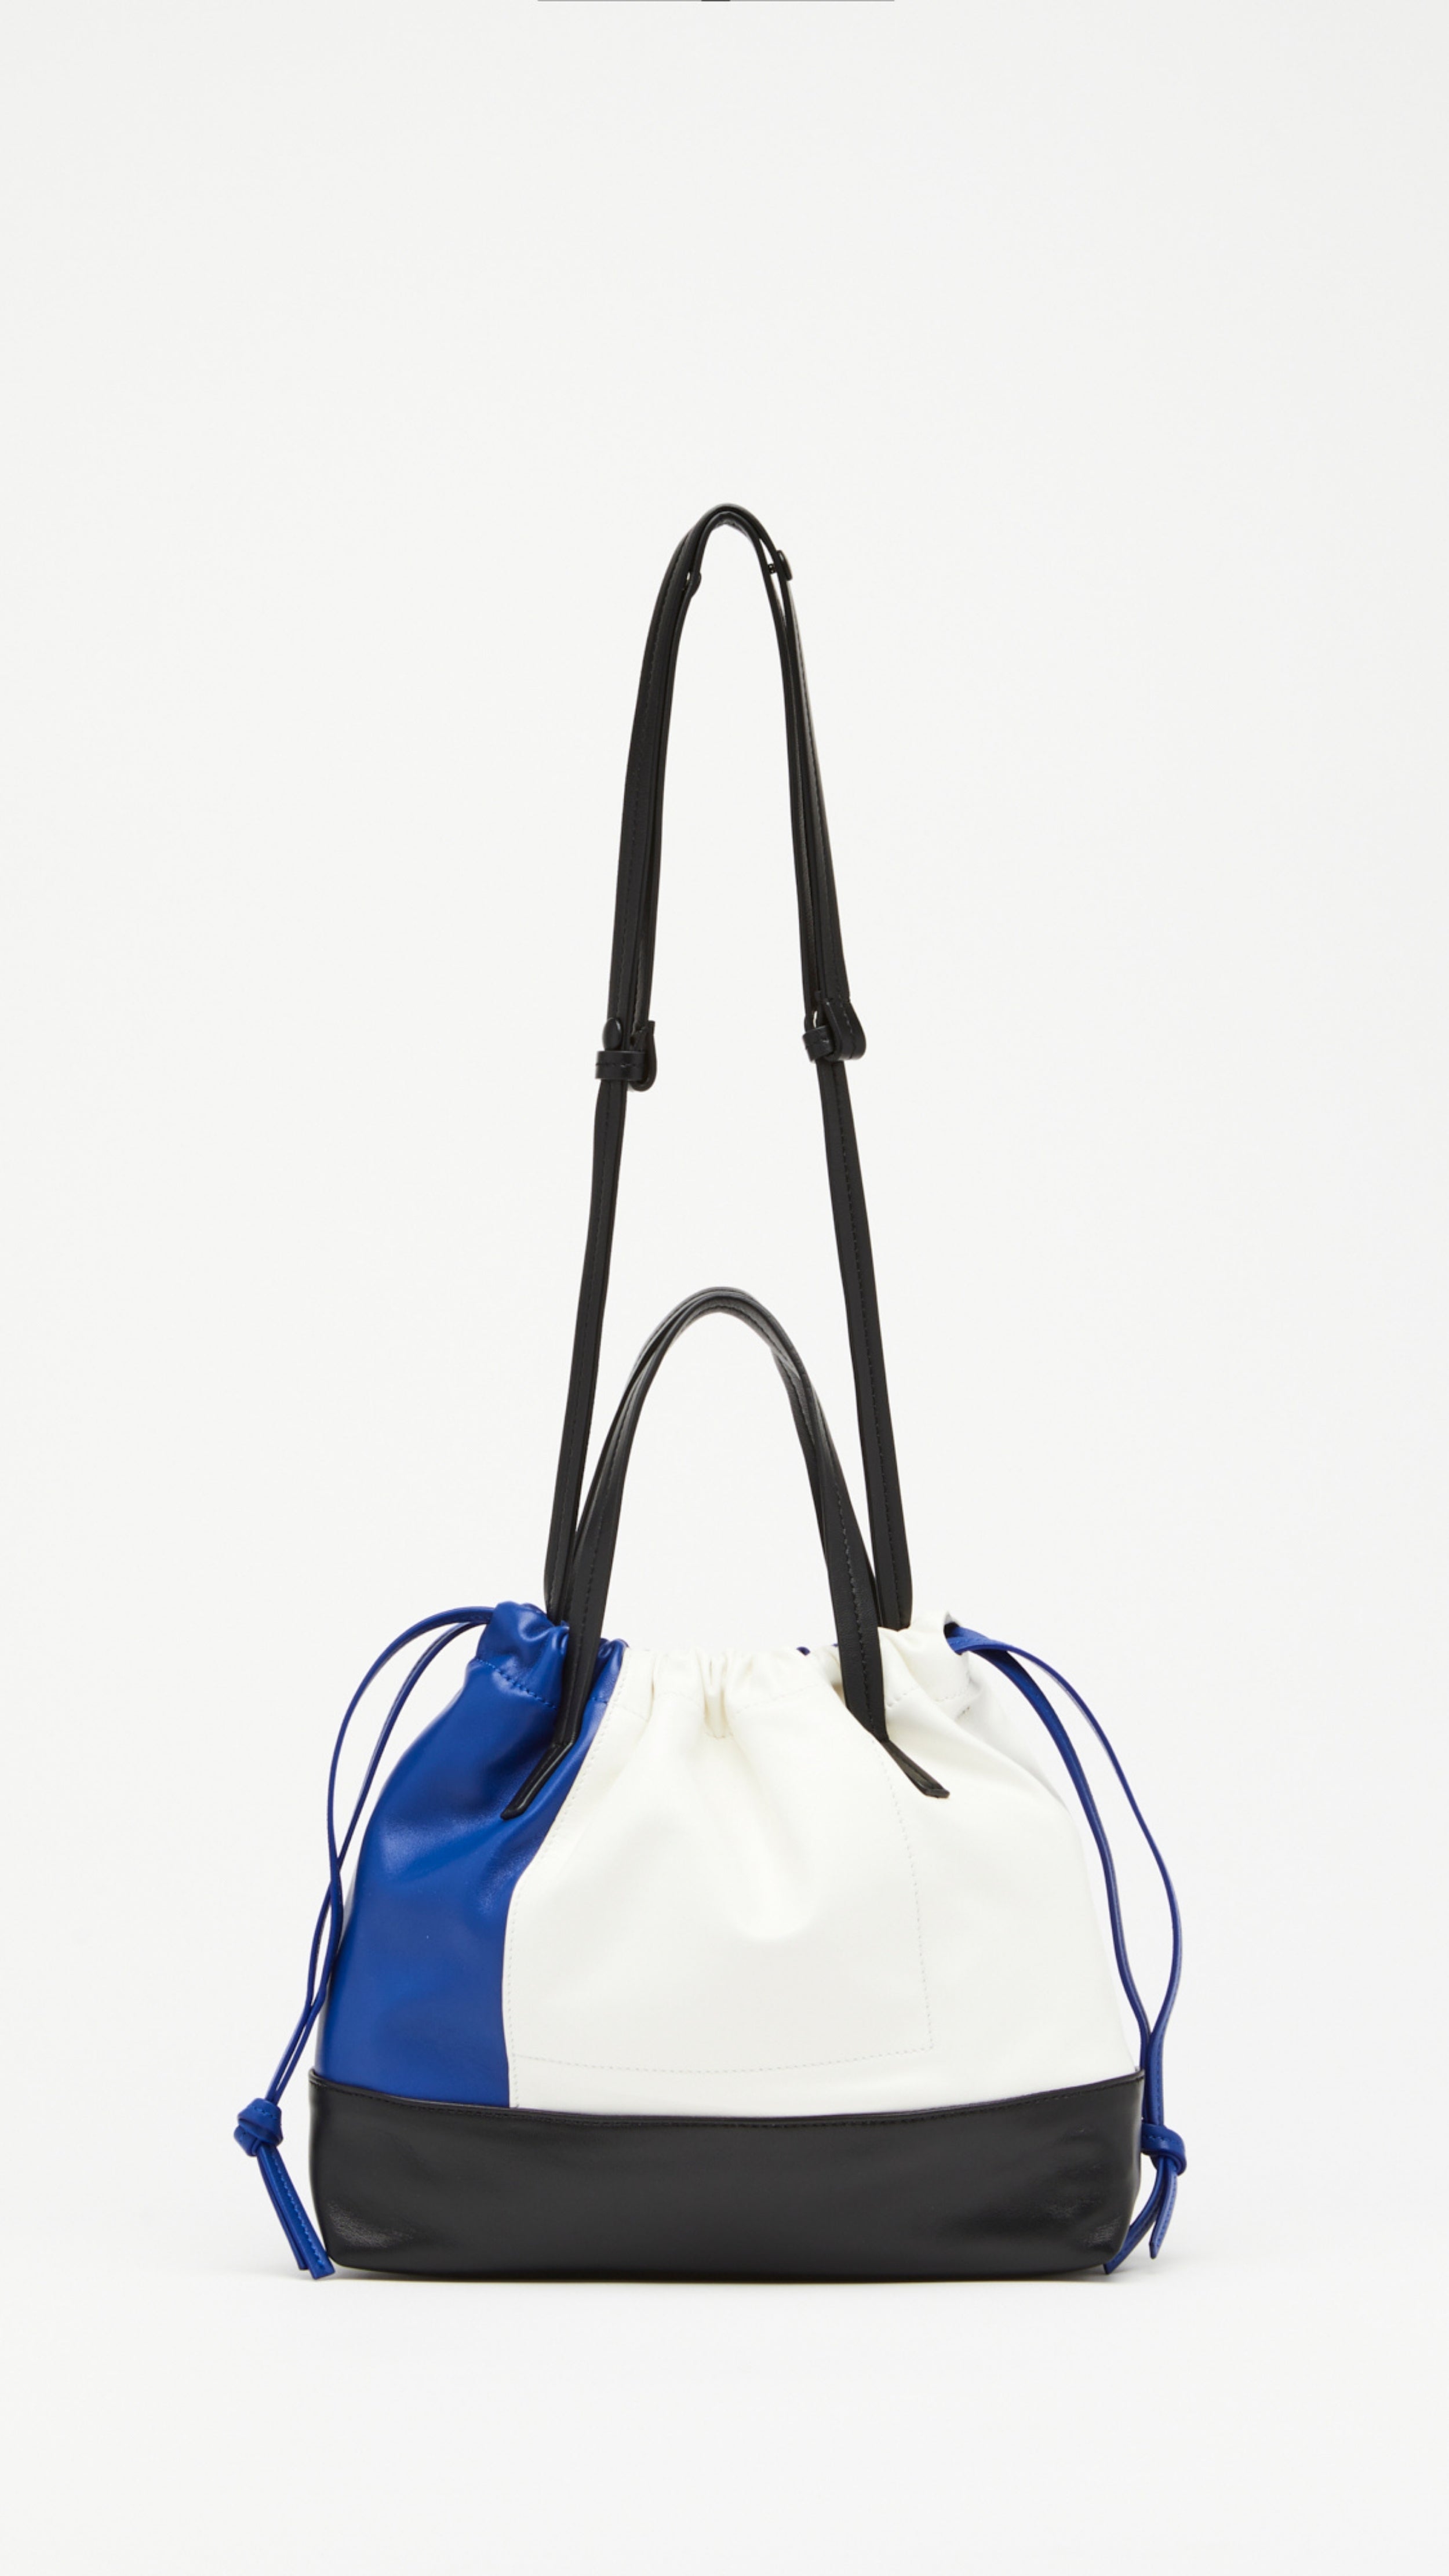 Plan C Small Coulisse Shopper Bag in soft color blocked leather of white, blue and black. zippered top with a drawstring, double handles, and a detachable crossbody strap. Shown from the front view.